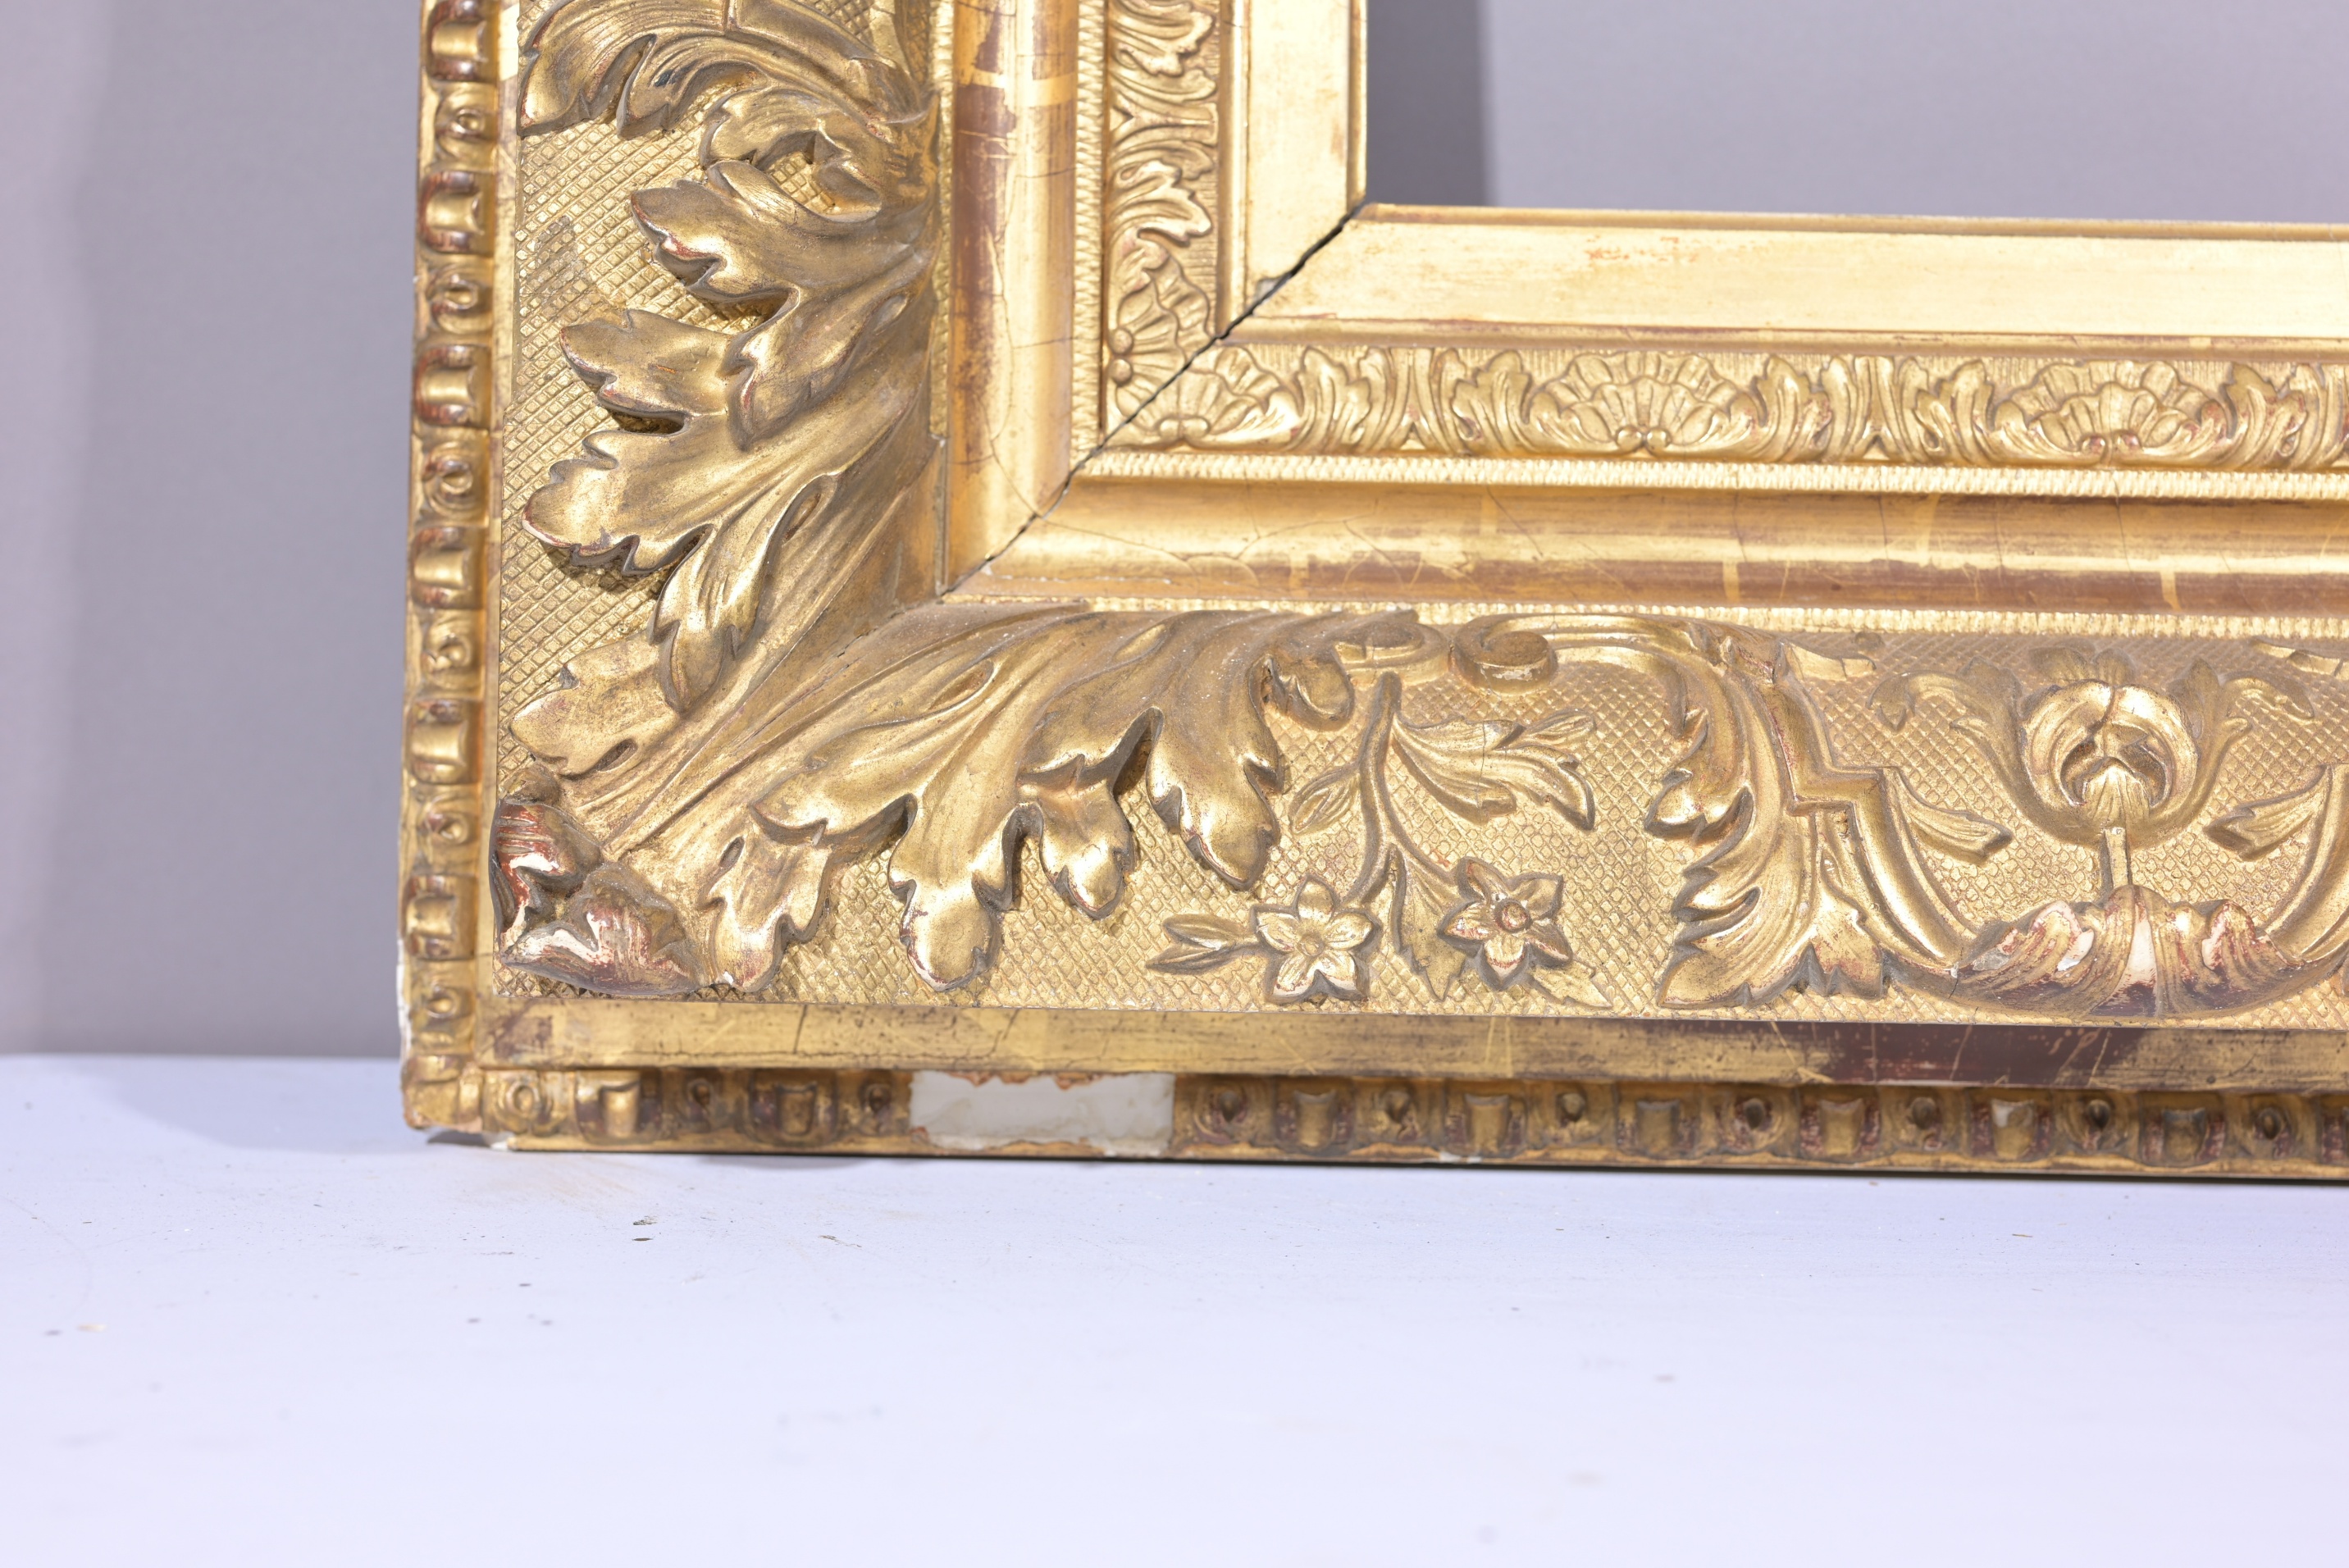 French 19th C Gilt Wood Frame - 37 x 21.75 - Image 6 of 9